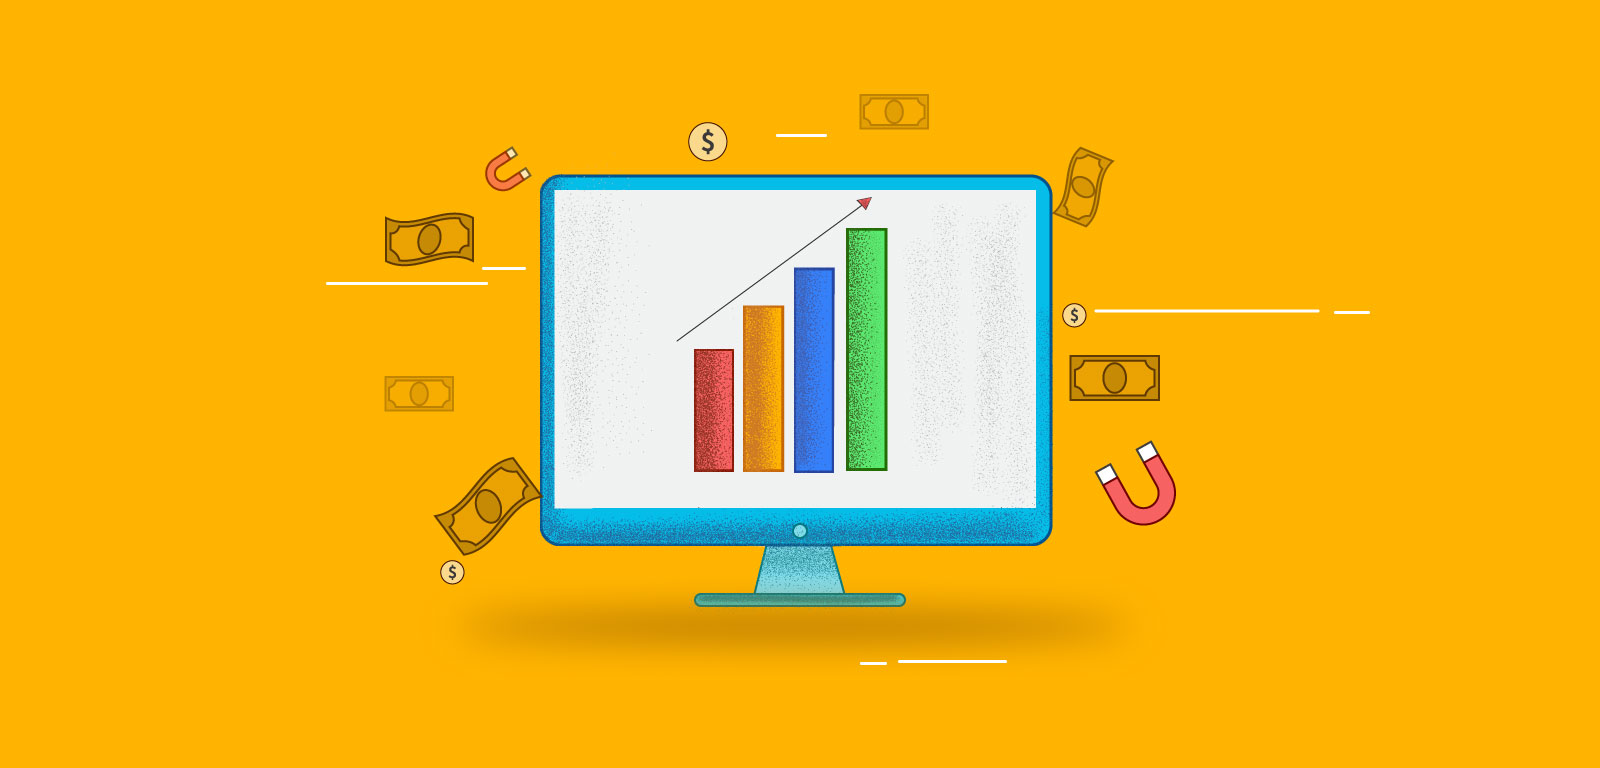 How to increase marketing ROI with Inbound Leads?